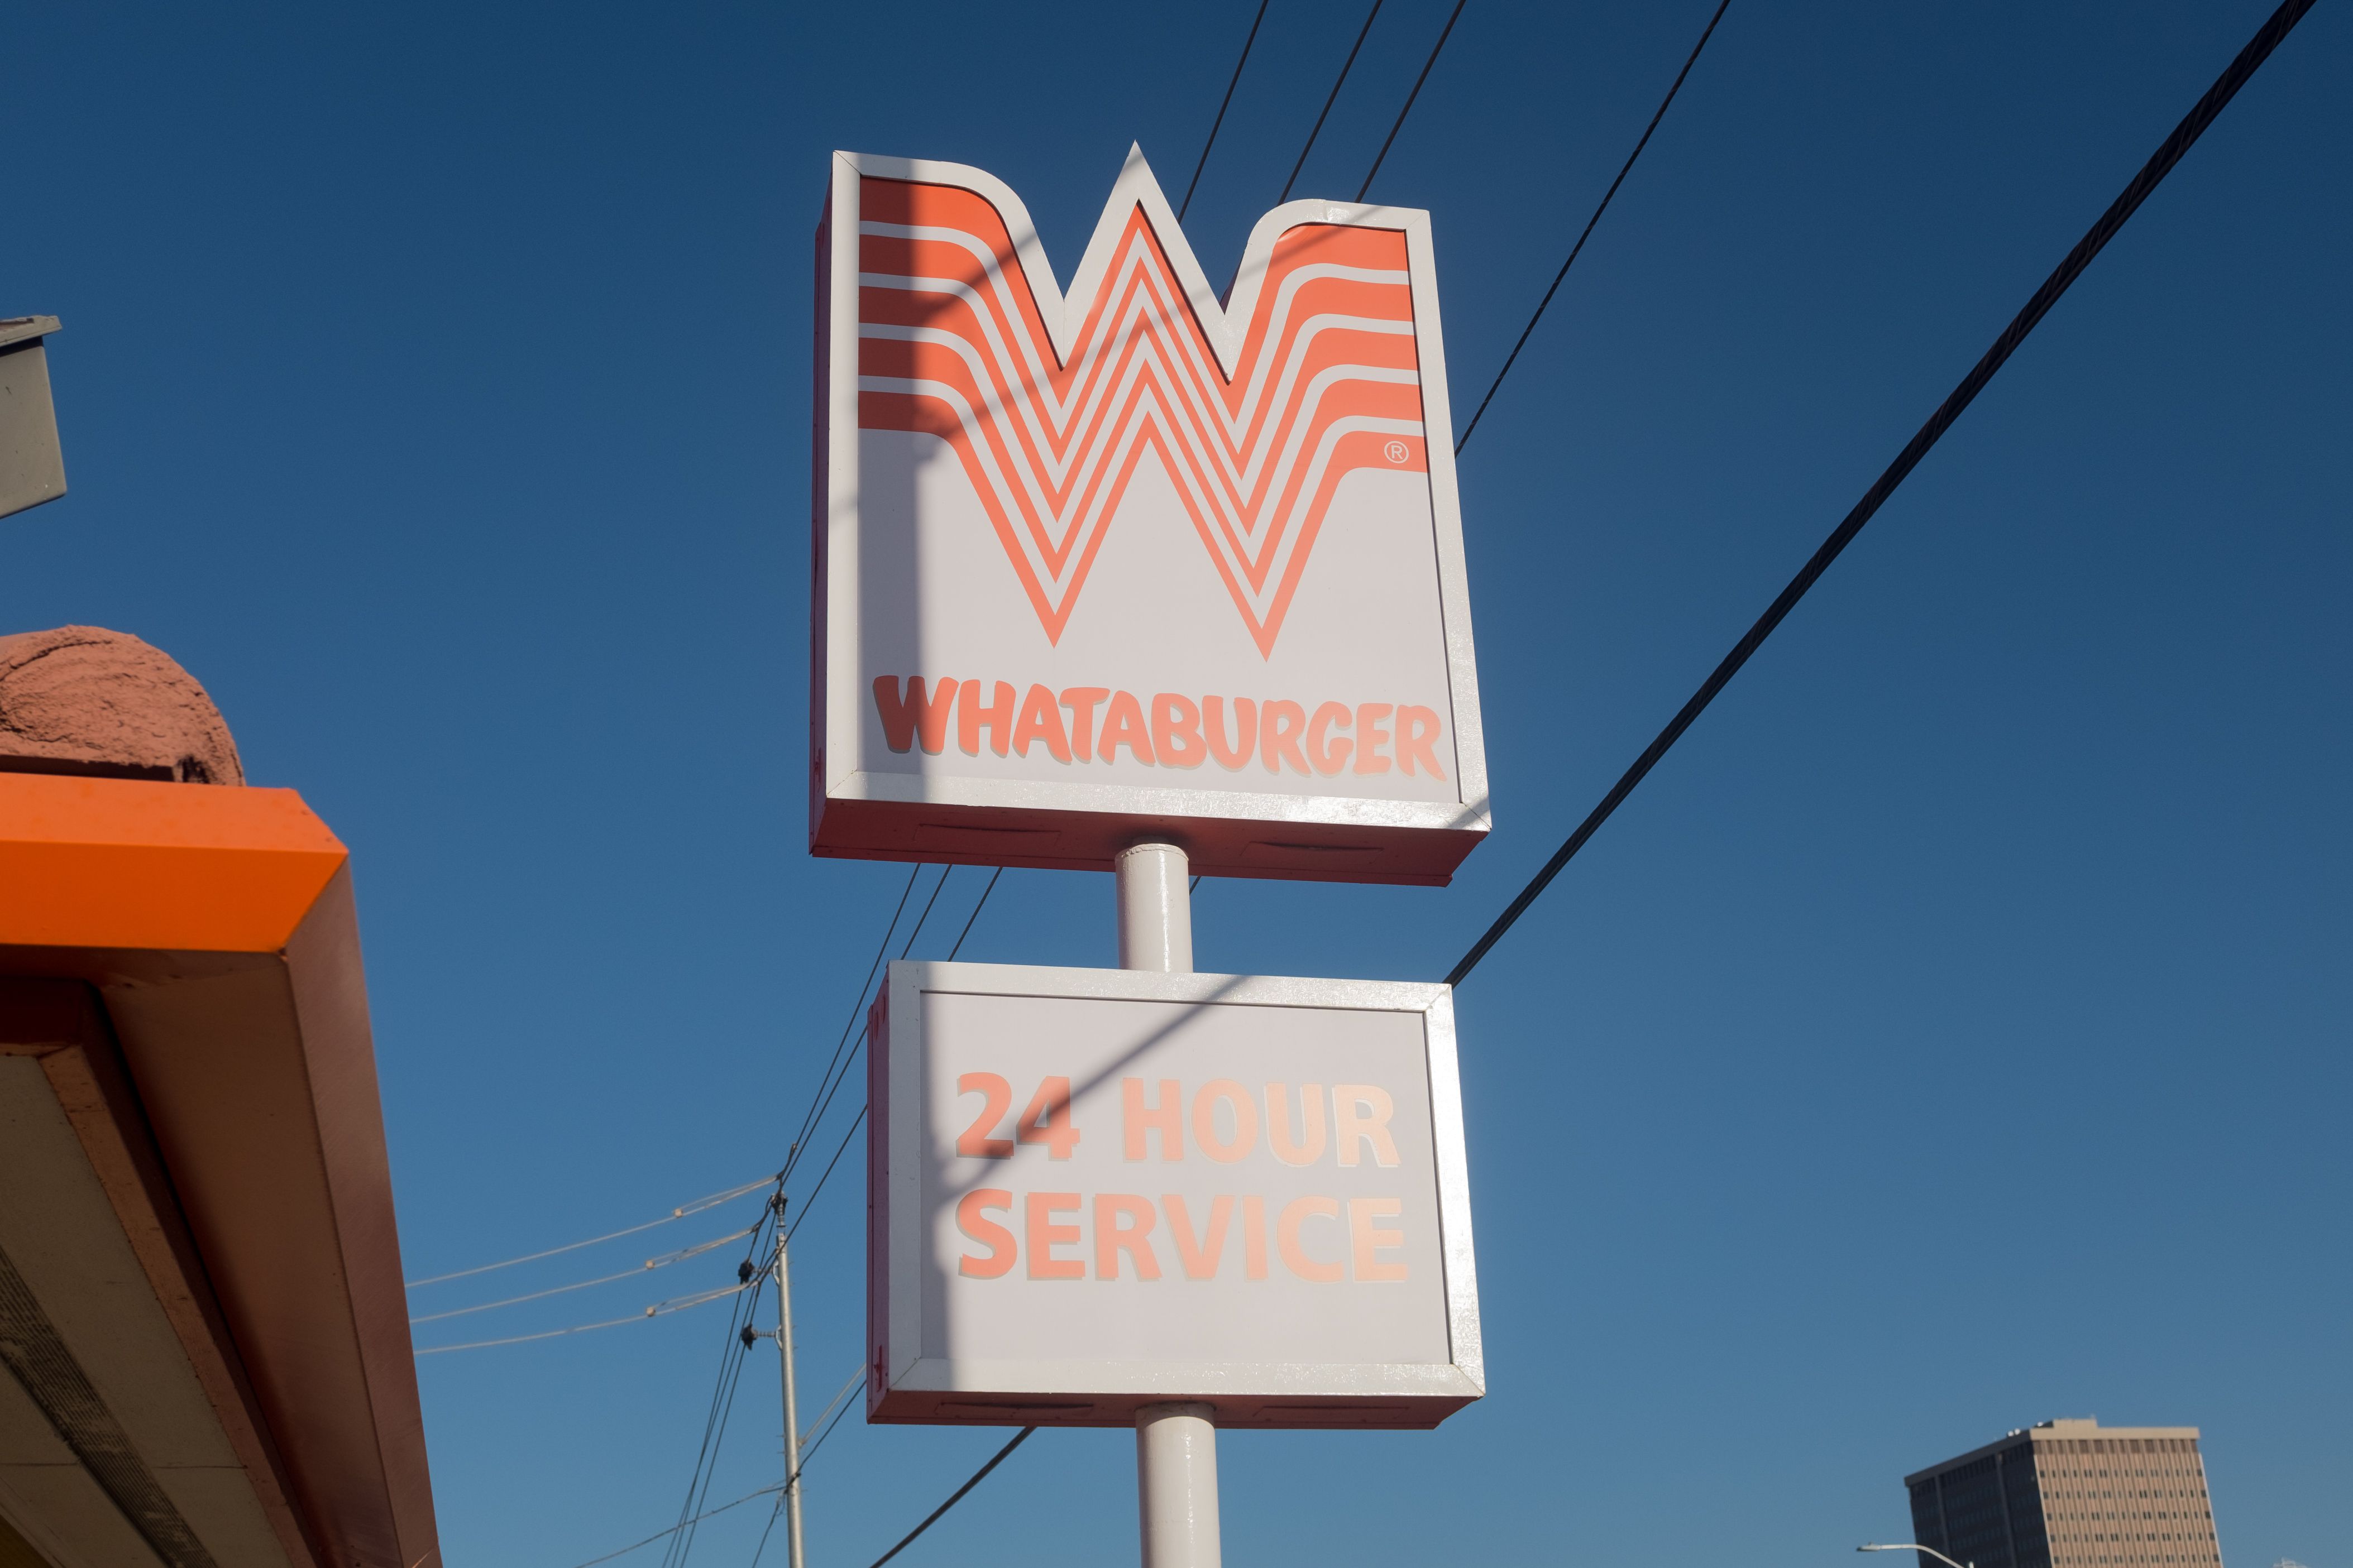 I Tried The Most Popular Items At Whataburger—The Texas Version Of In-N-Out